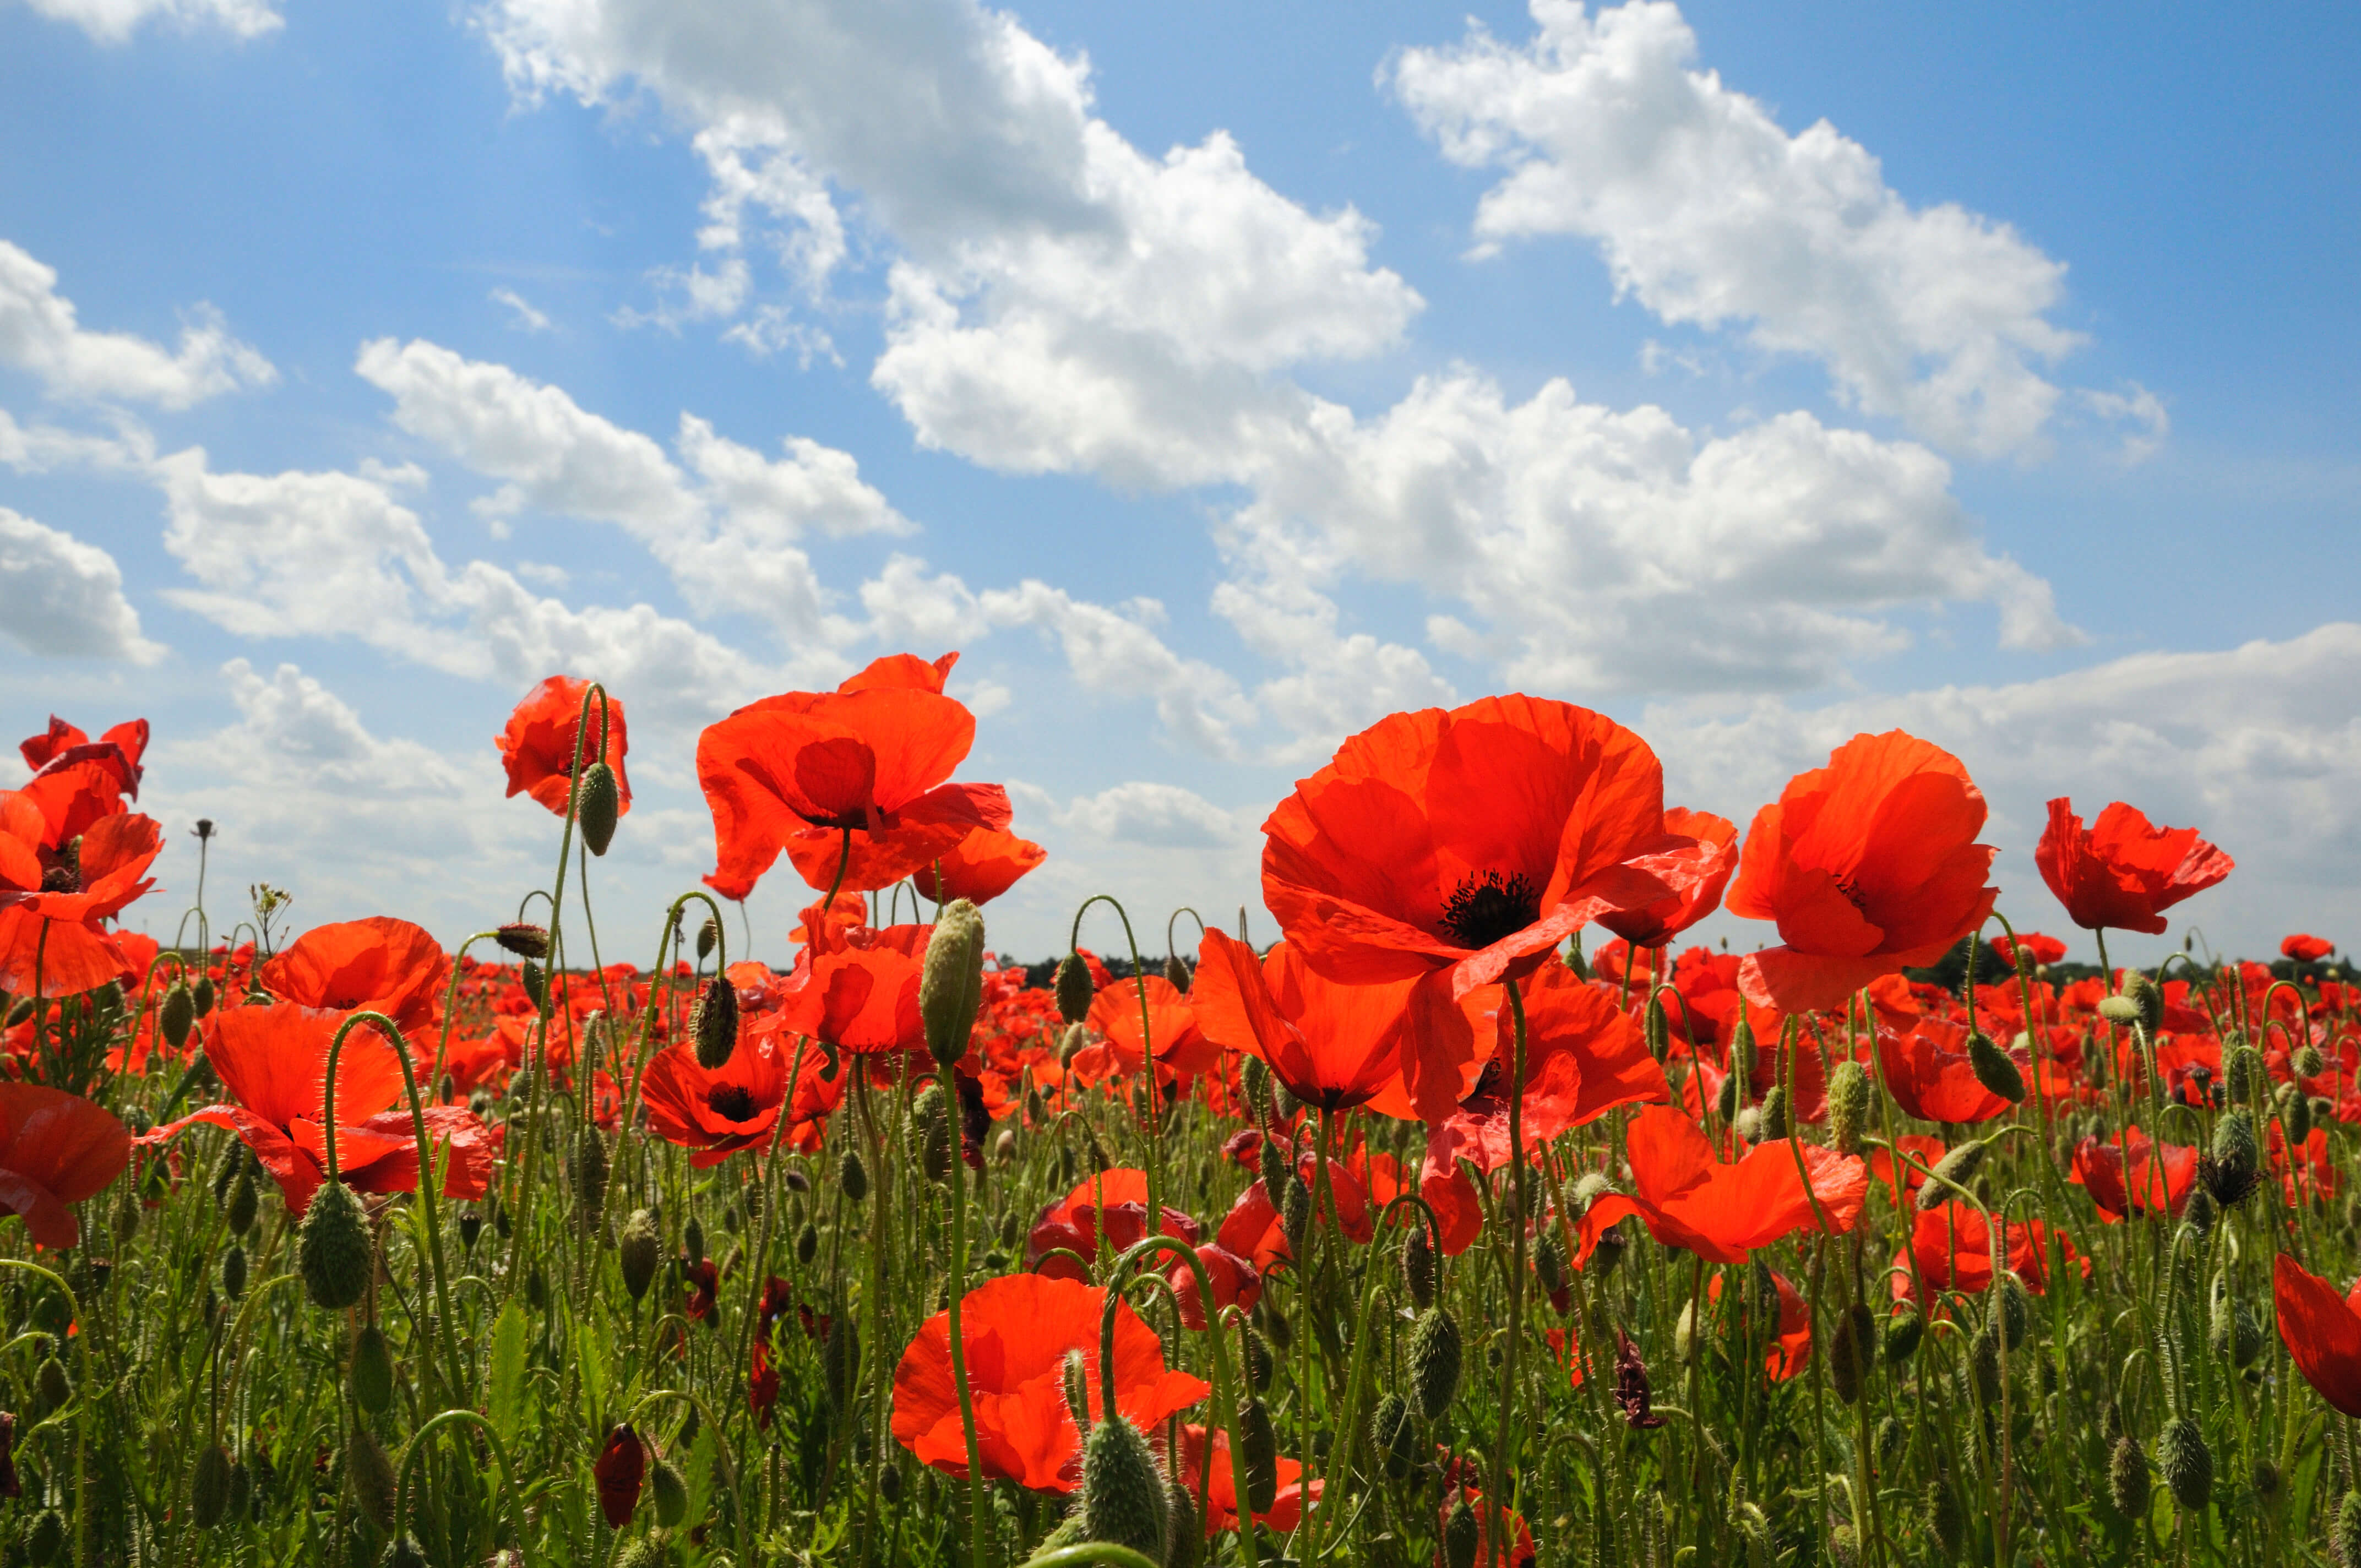 free pictures of poppies to download